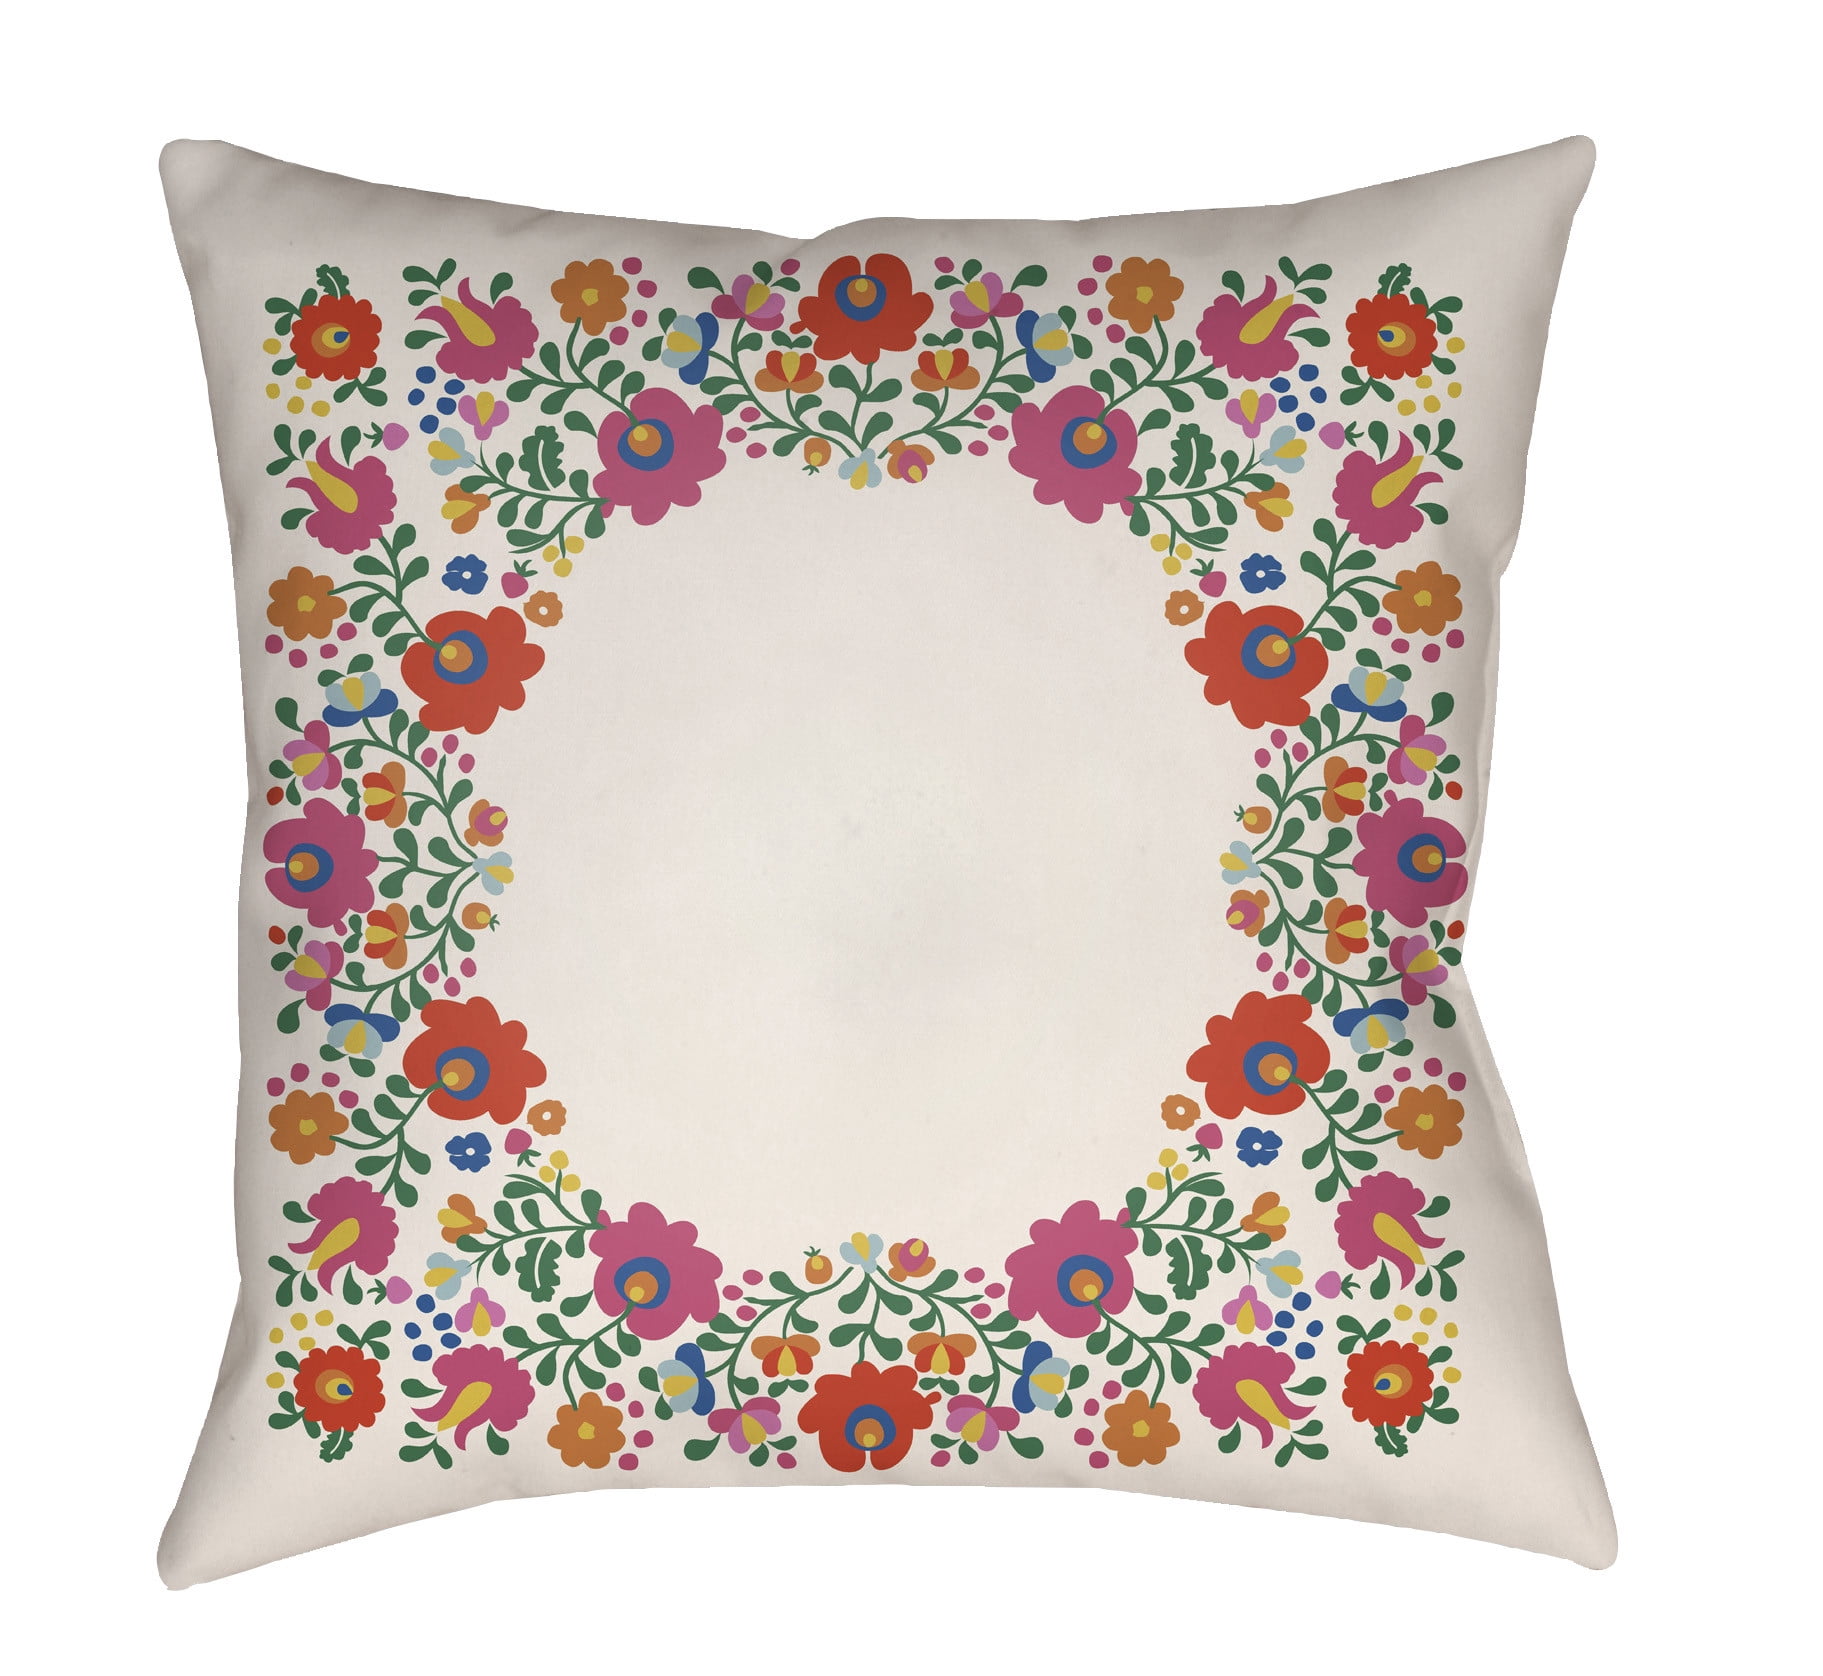 Picture of Artistic Weavers LOTA1305-1616 Lolita Square Pillow, Poppy Red & Hot Pink - 16 x 16 in.